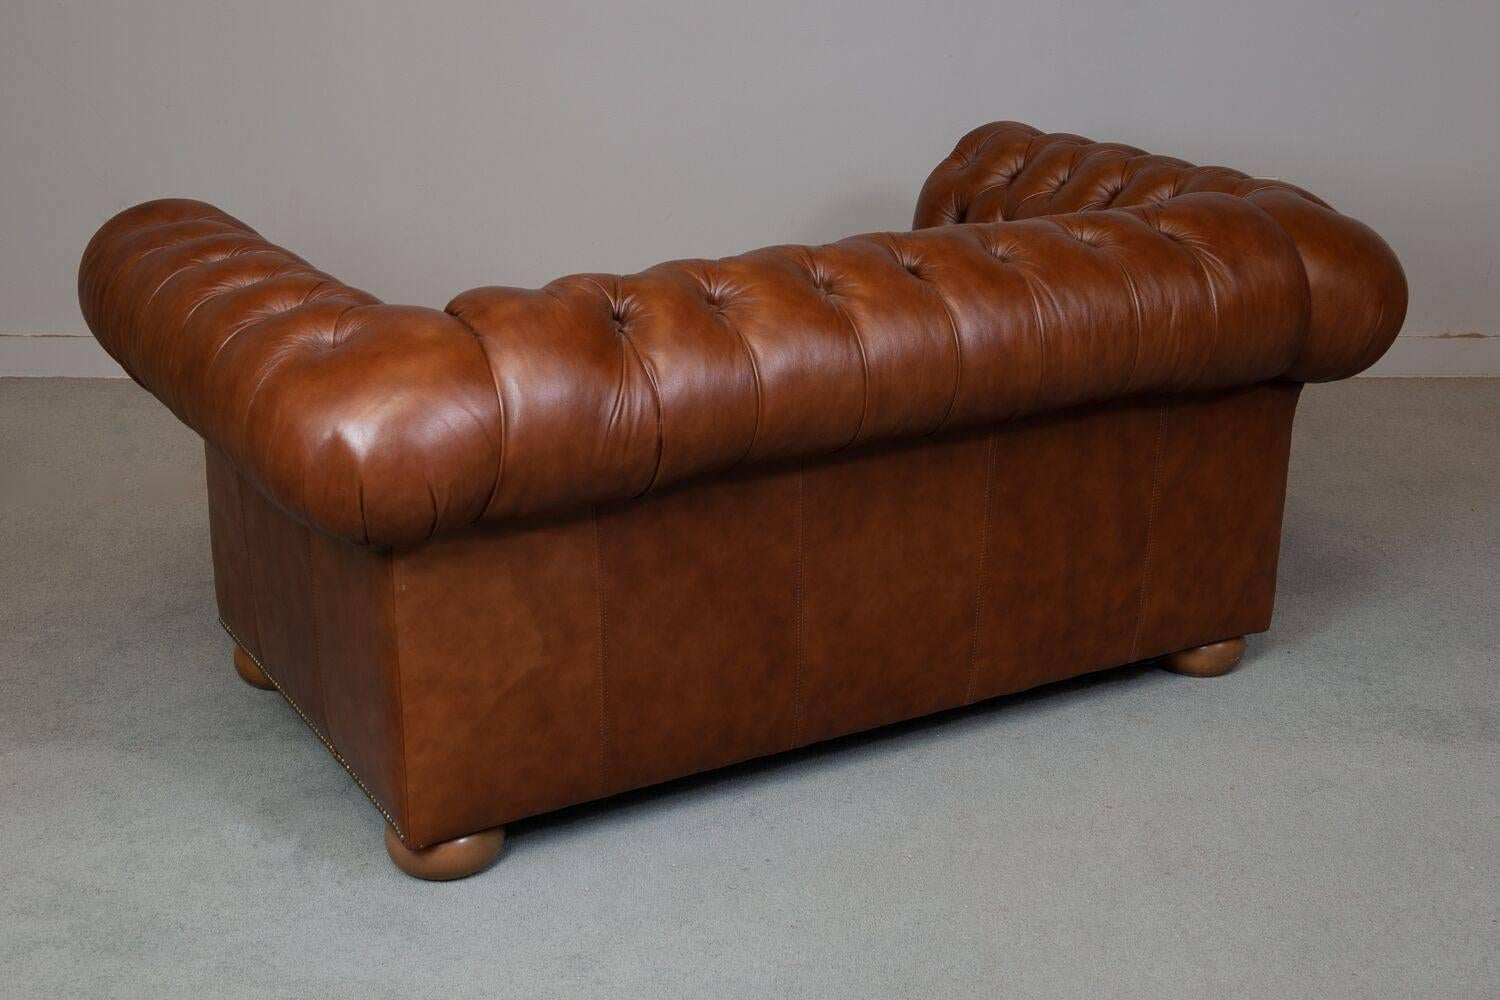 Vintage tufted leather chesterfield sofa. Wooden base.